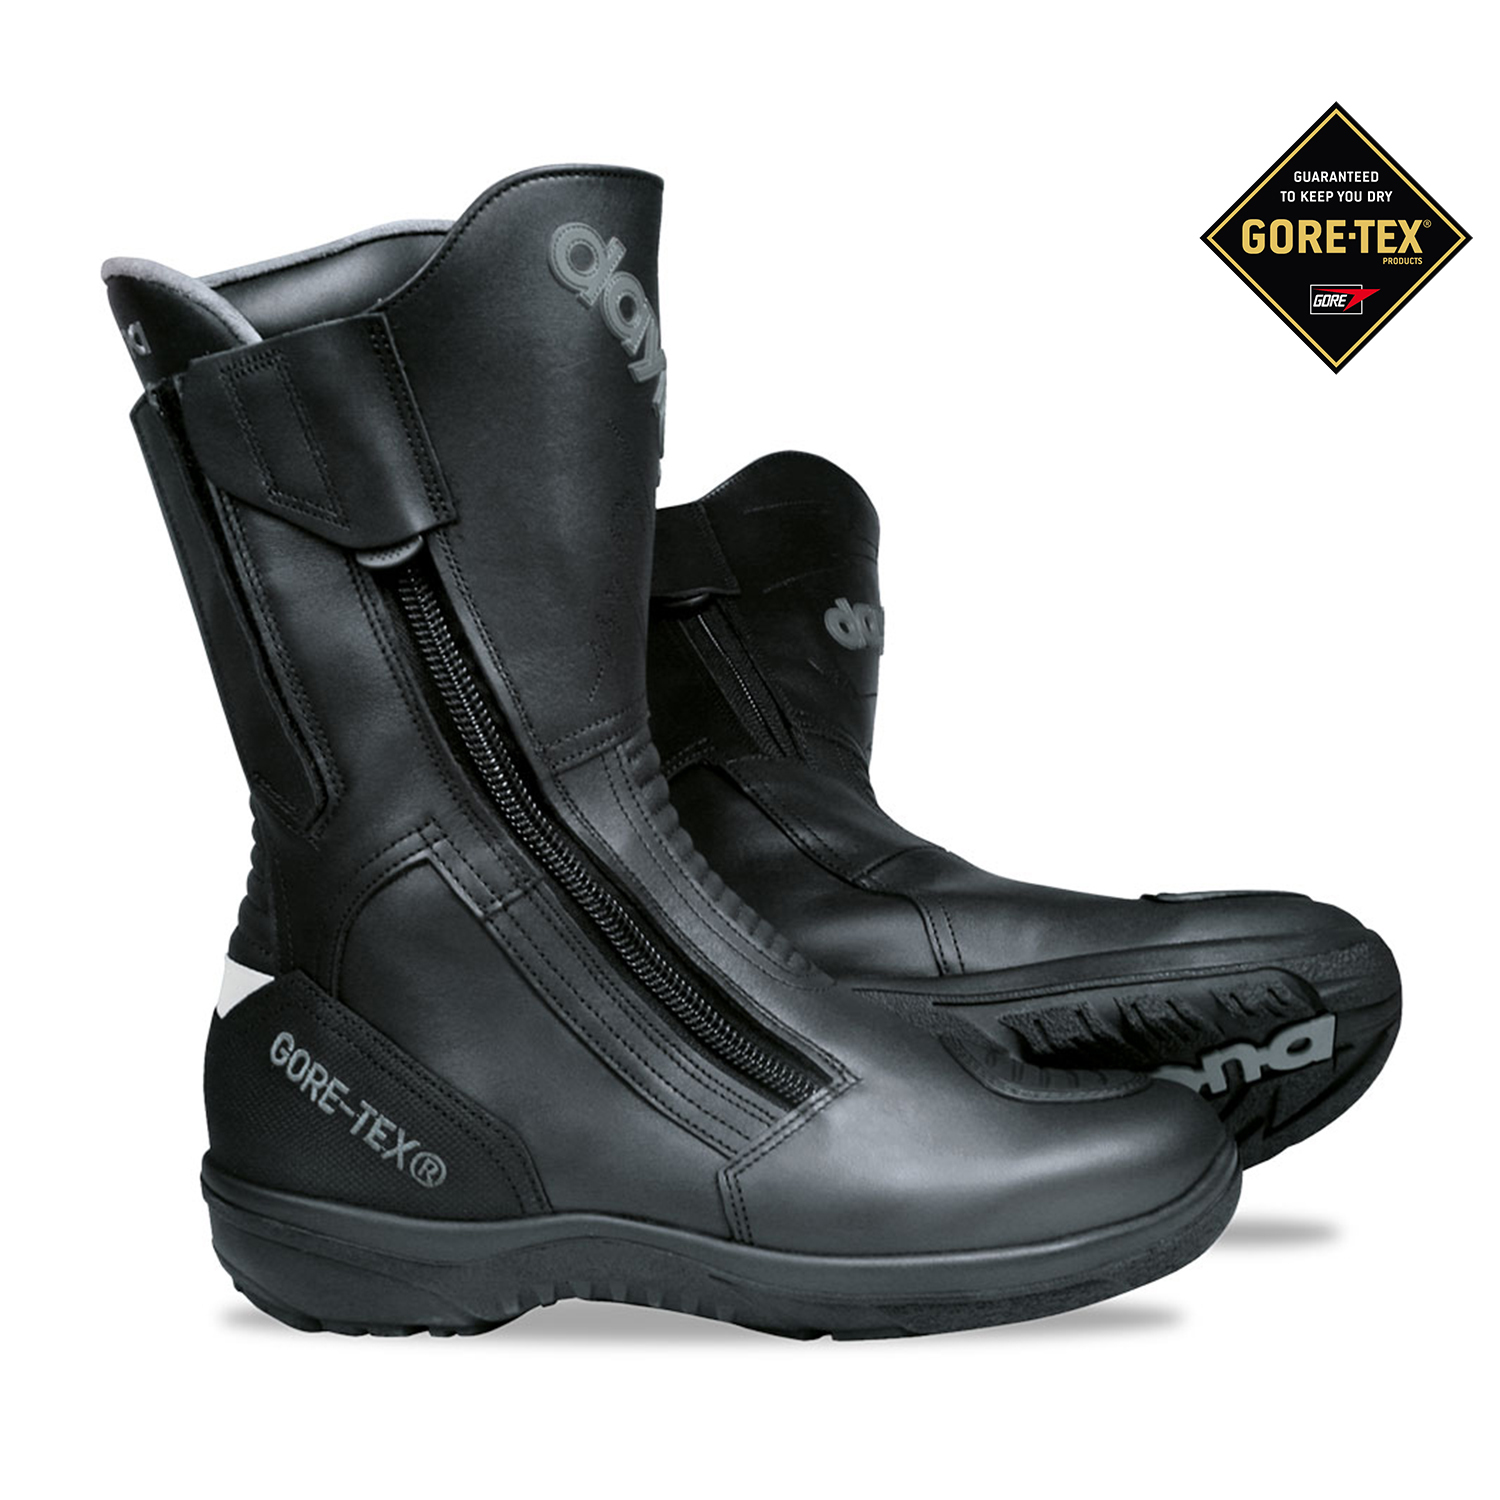 Daytona Road Star GTX M Touring Boots - Available in Various Sizes